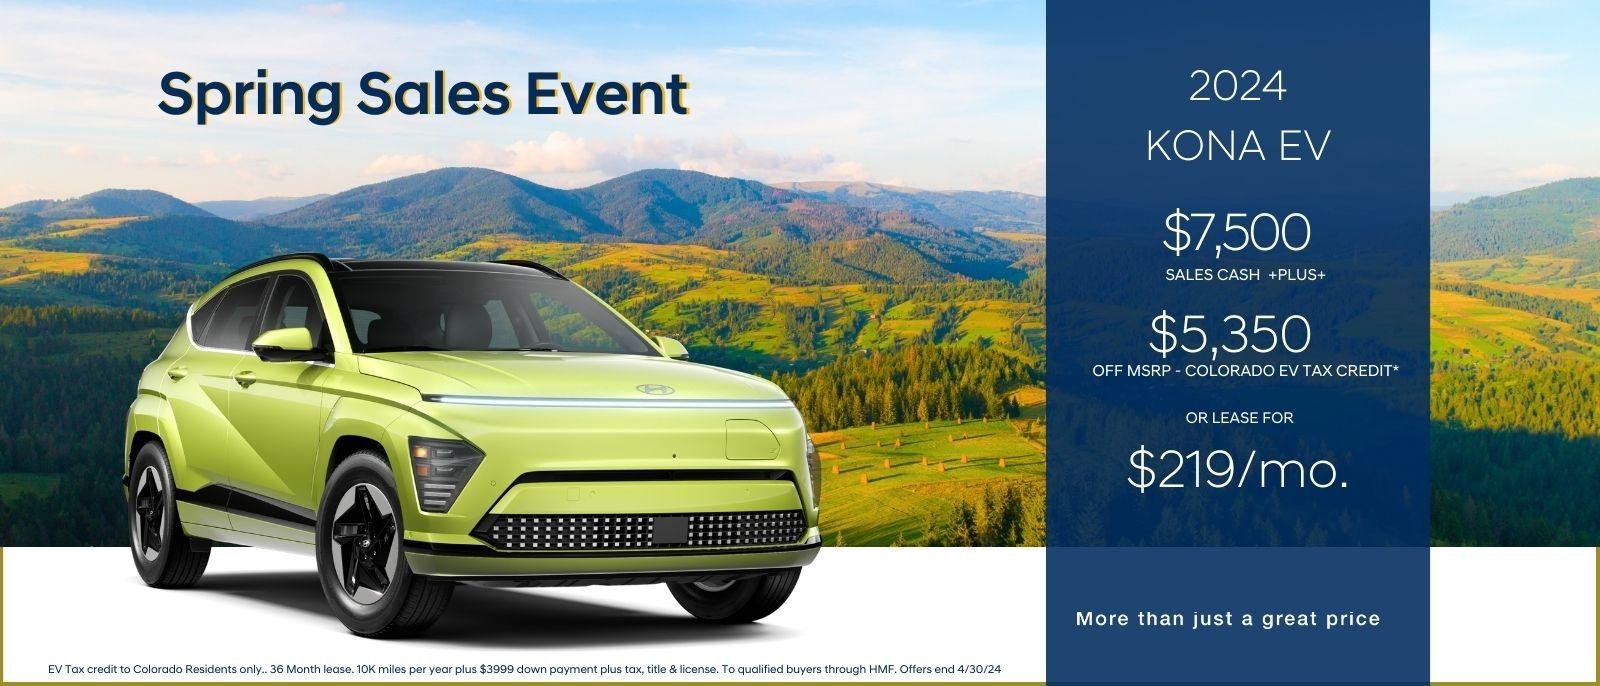 Spring Sales Event 

2024 Kona EV
$7,500 sales cash plus
$5,350 off MSRP- Colorado V Tax Credit 
or Lease for $219/mo

More than just a great price